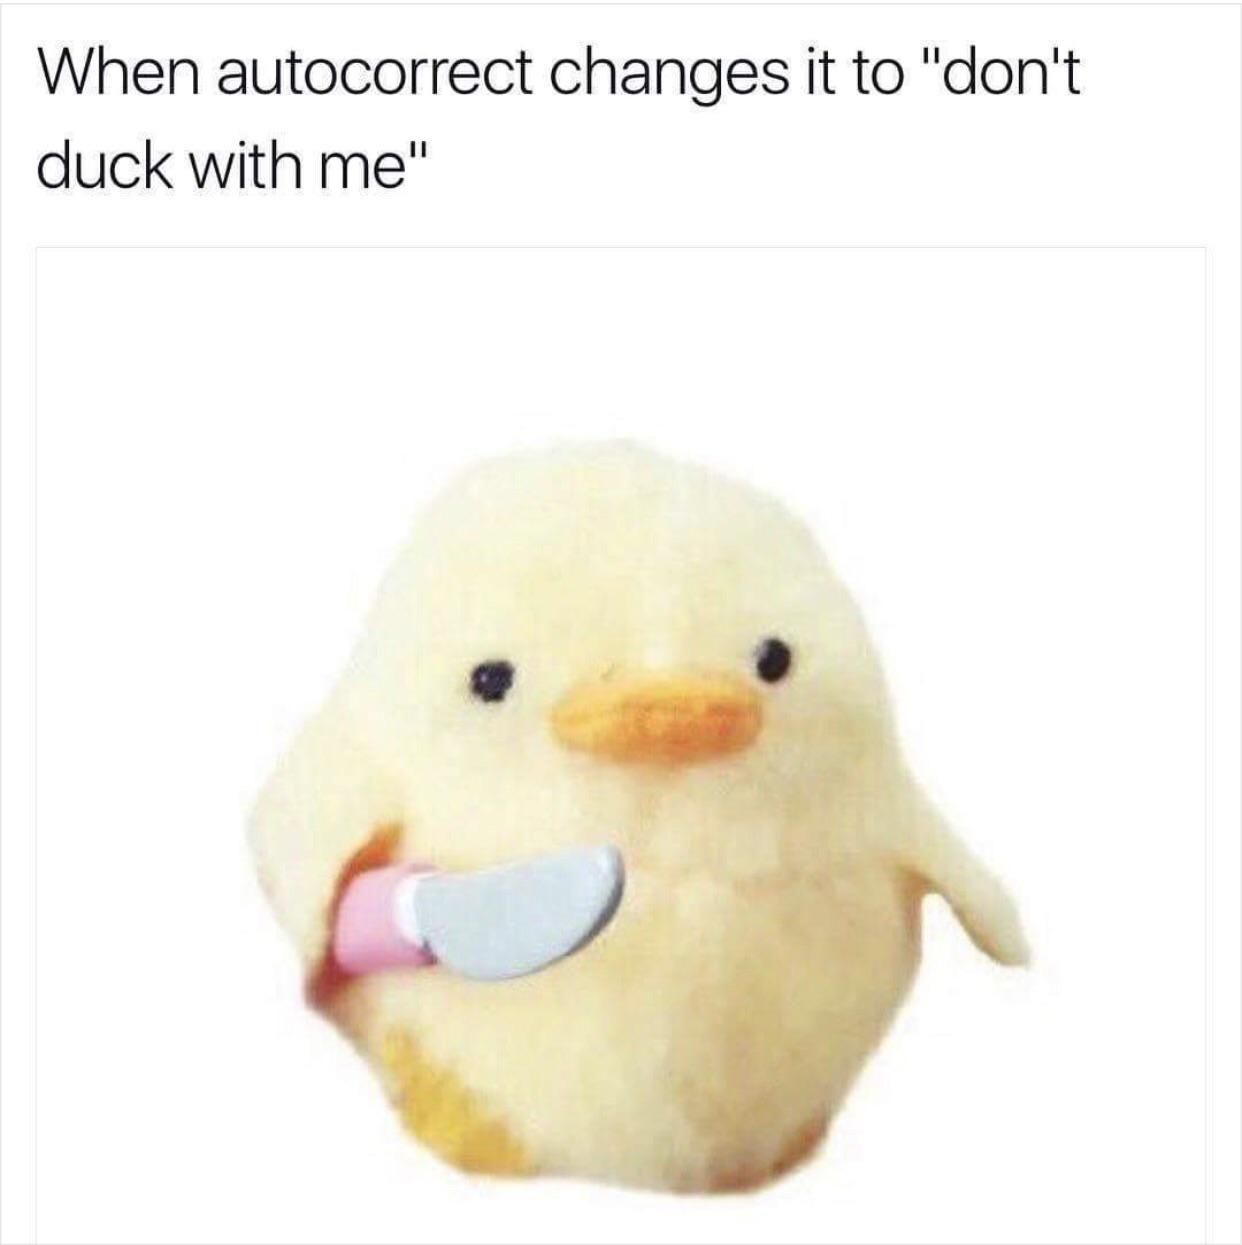 Don't duck with me